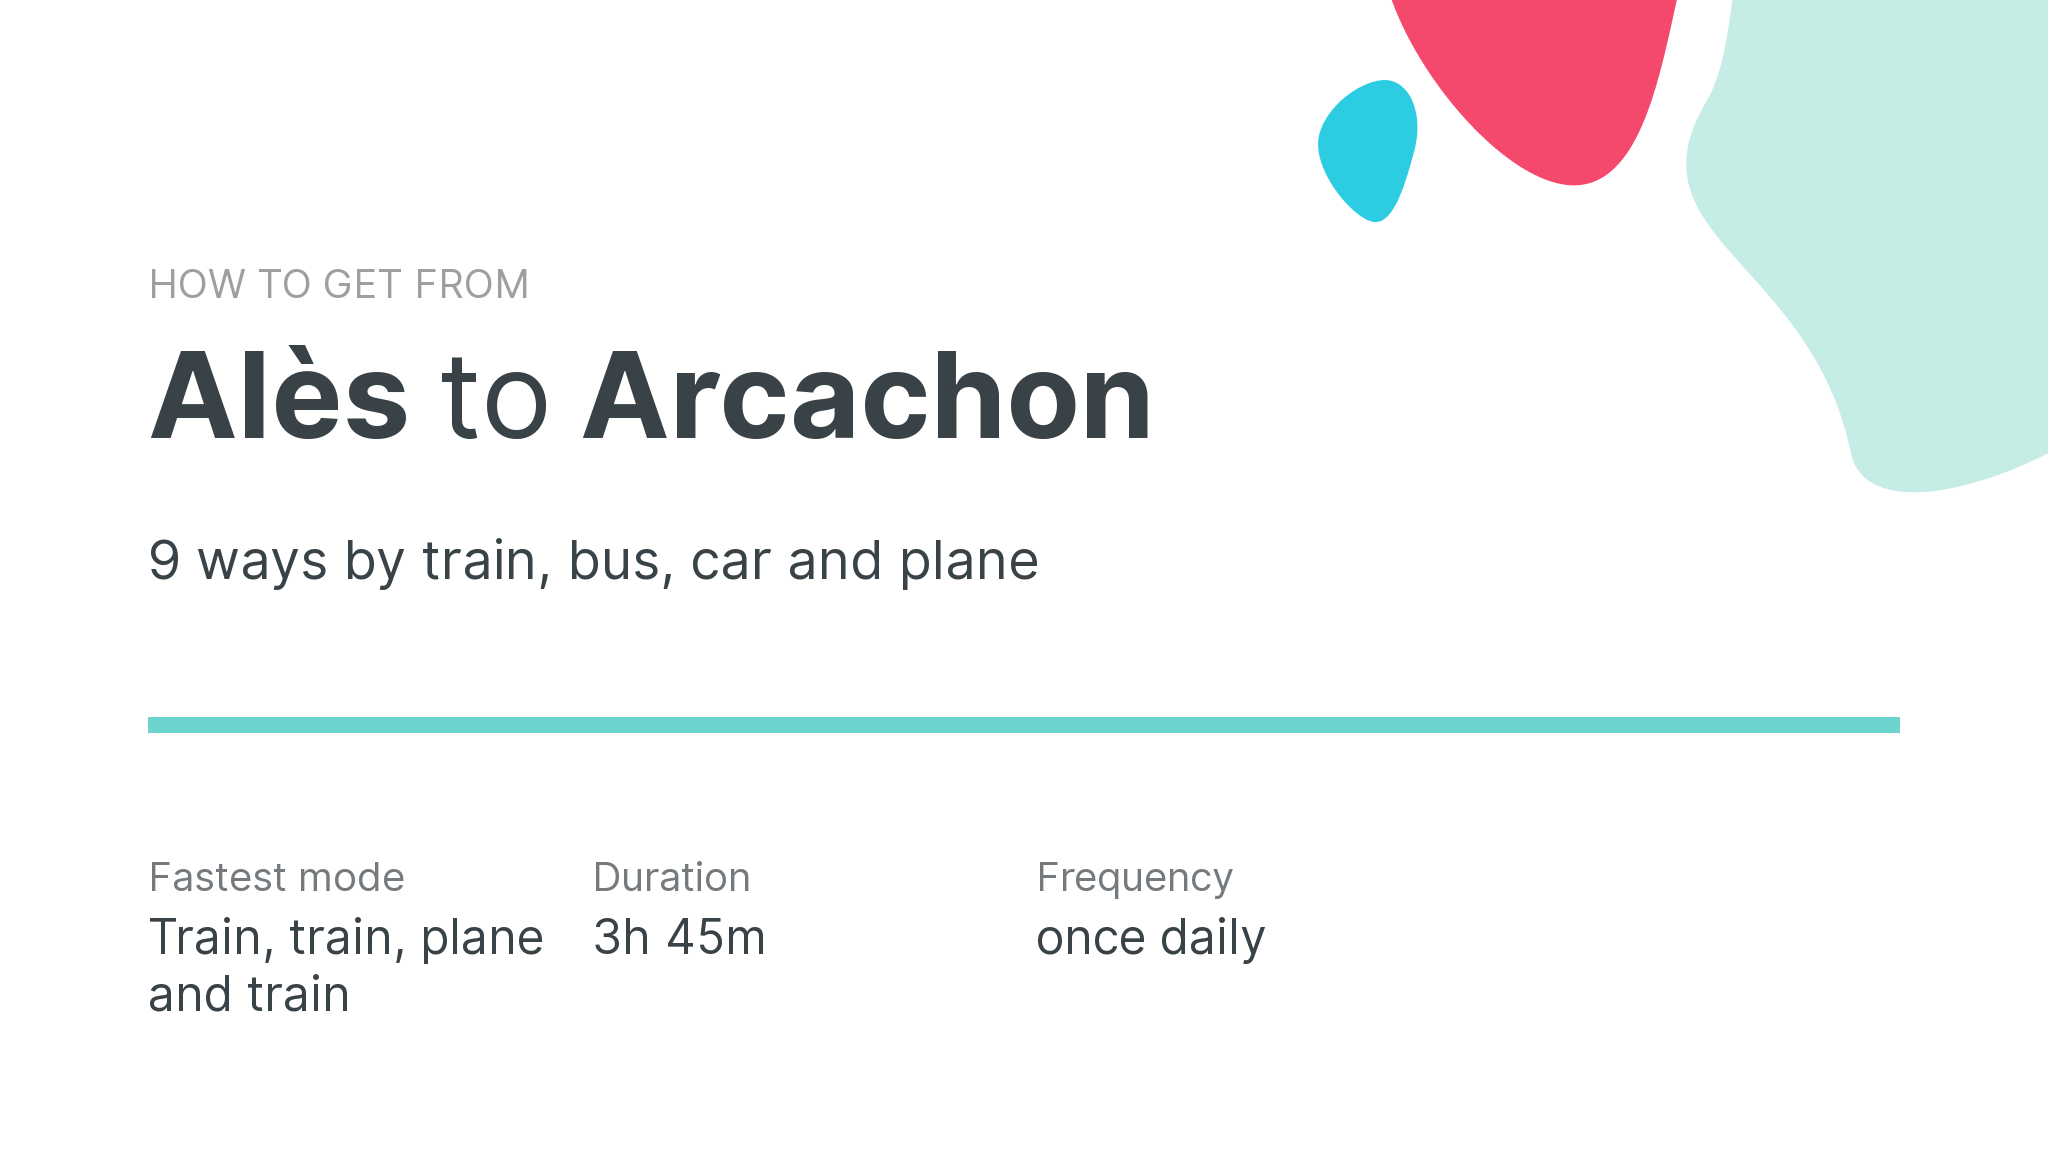 How do I get from Alès to Arcachon